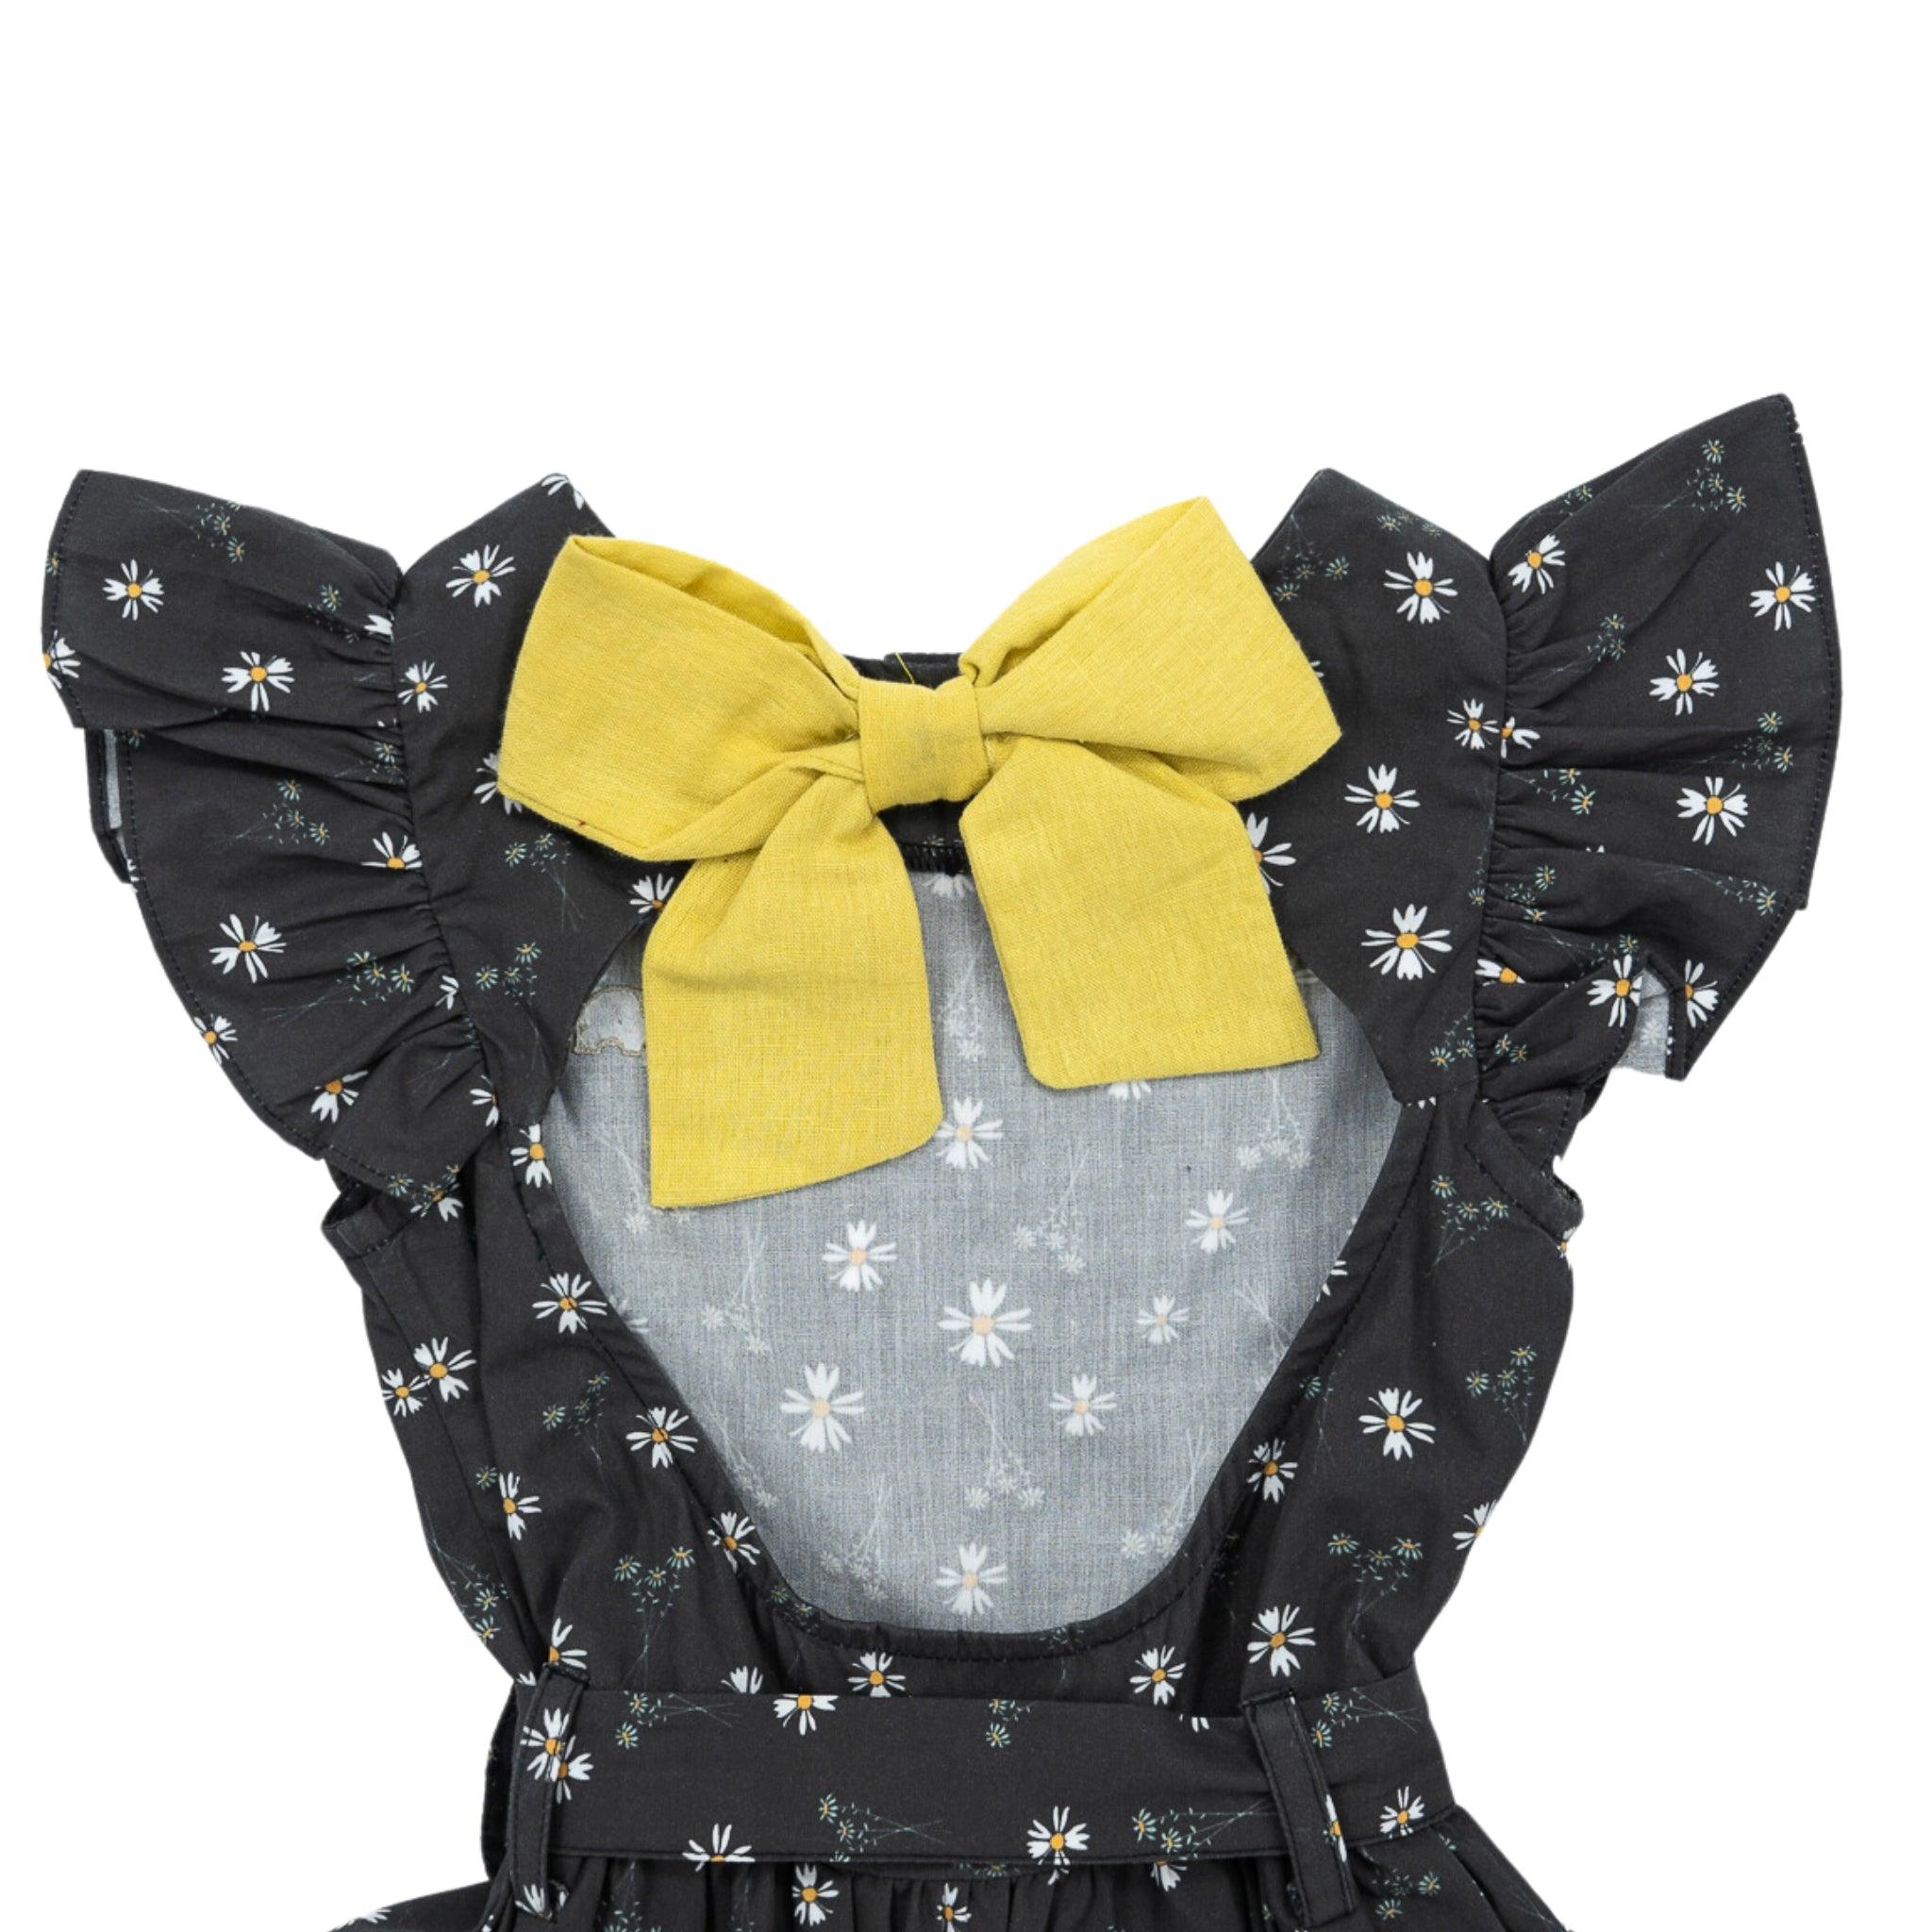 Karee Petite Blossom Black Cotton Dress with a prominent yellow bow on the bodice, isolated on a white background.